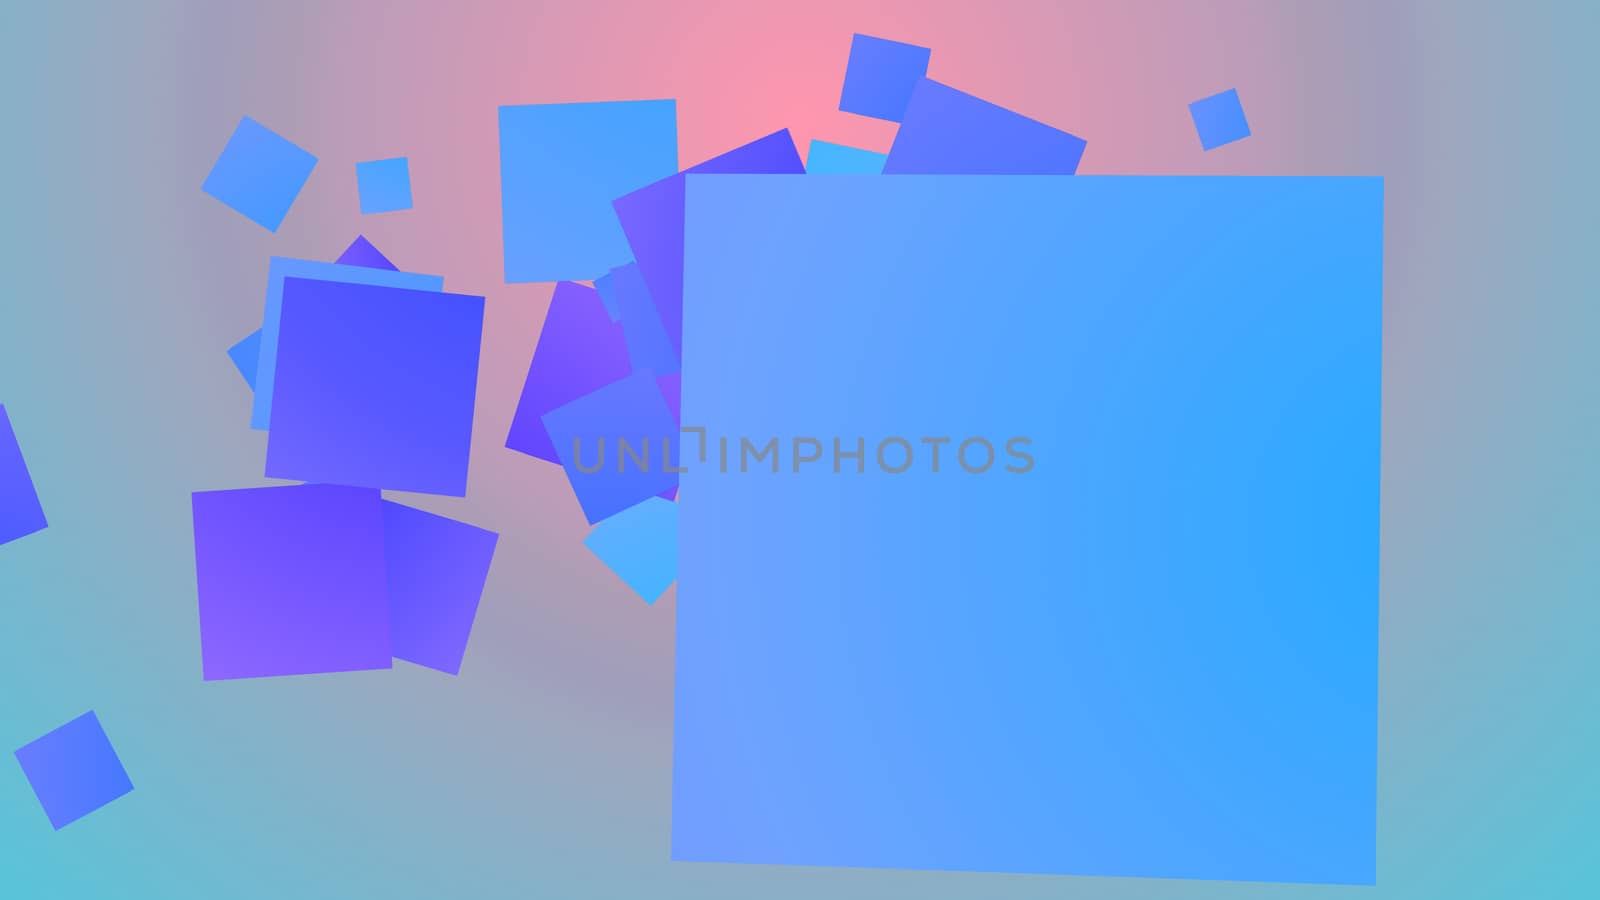 A merry 3d illustration of spinning big and small squares of blue, violet and celeste colors frolicking joyfully in light purple and blue background. They look hilarious